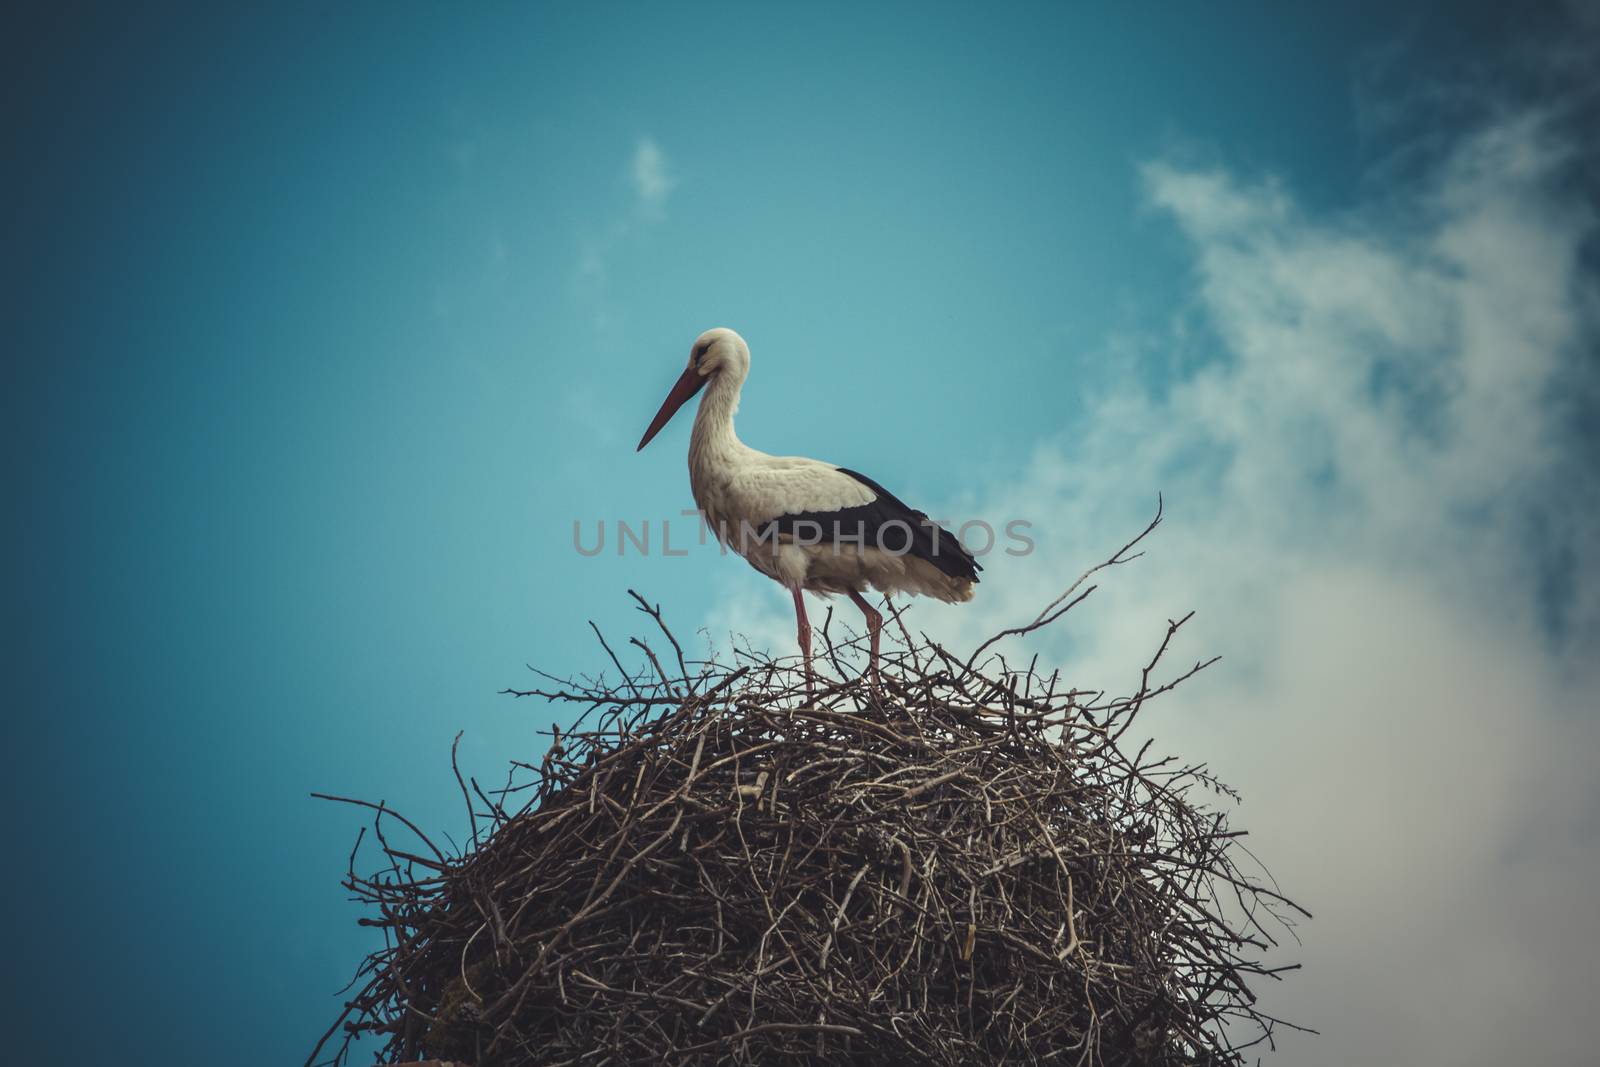 Bird, Stork nest made ������of tree branches over blue sky in dramatic